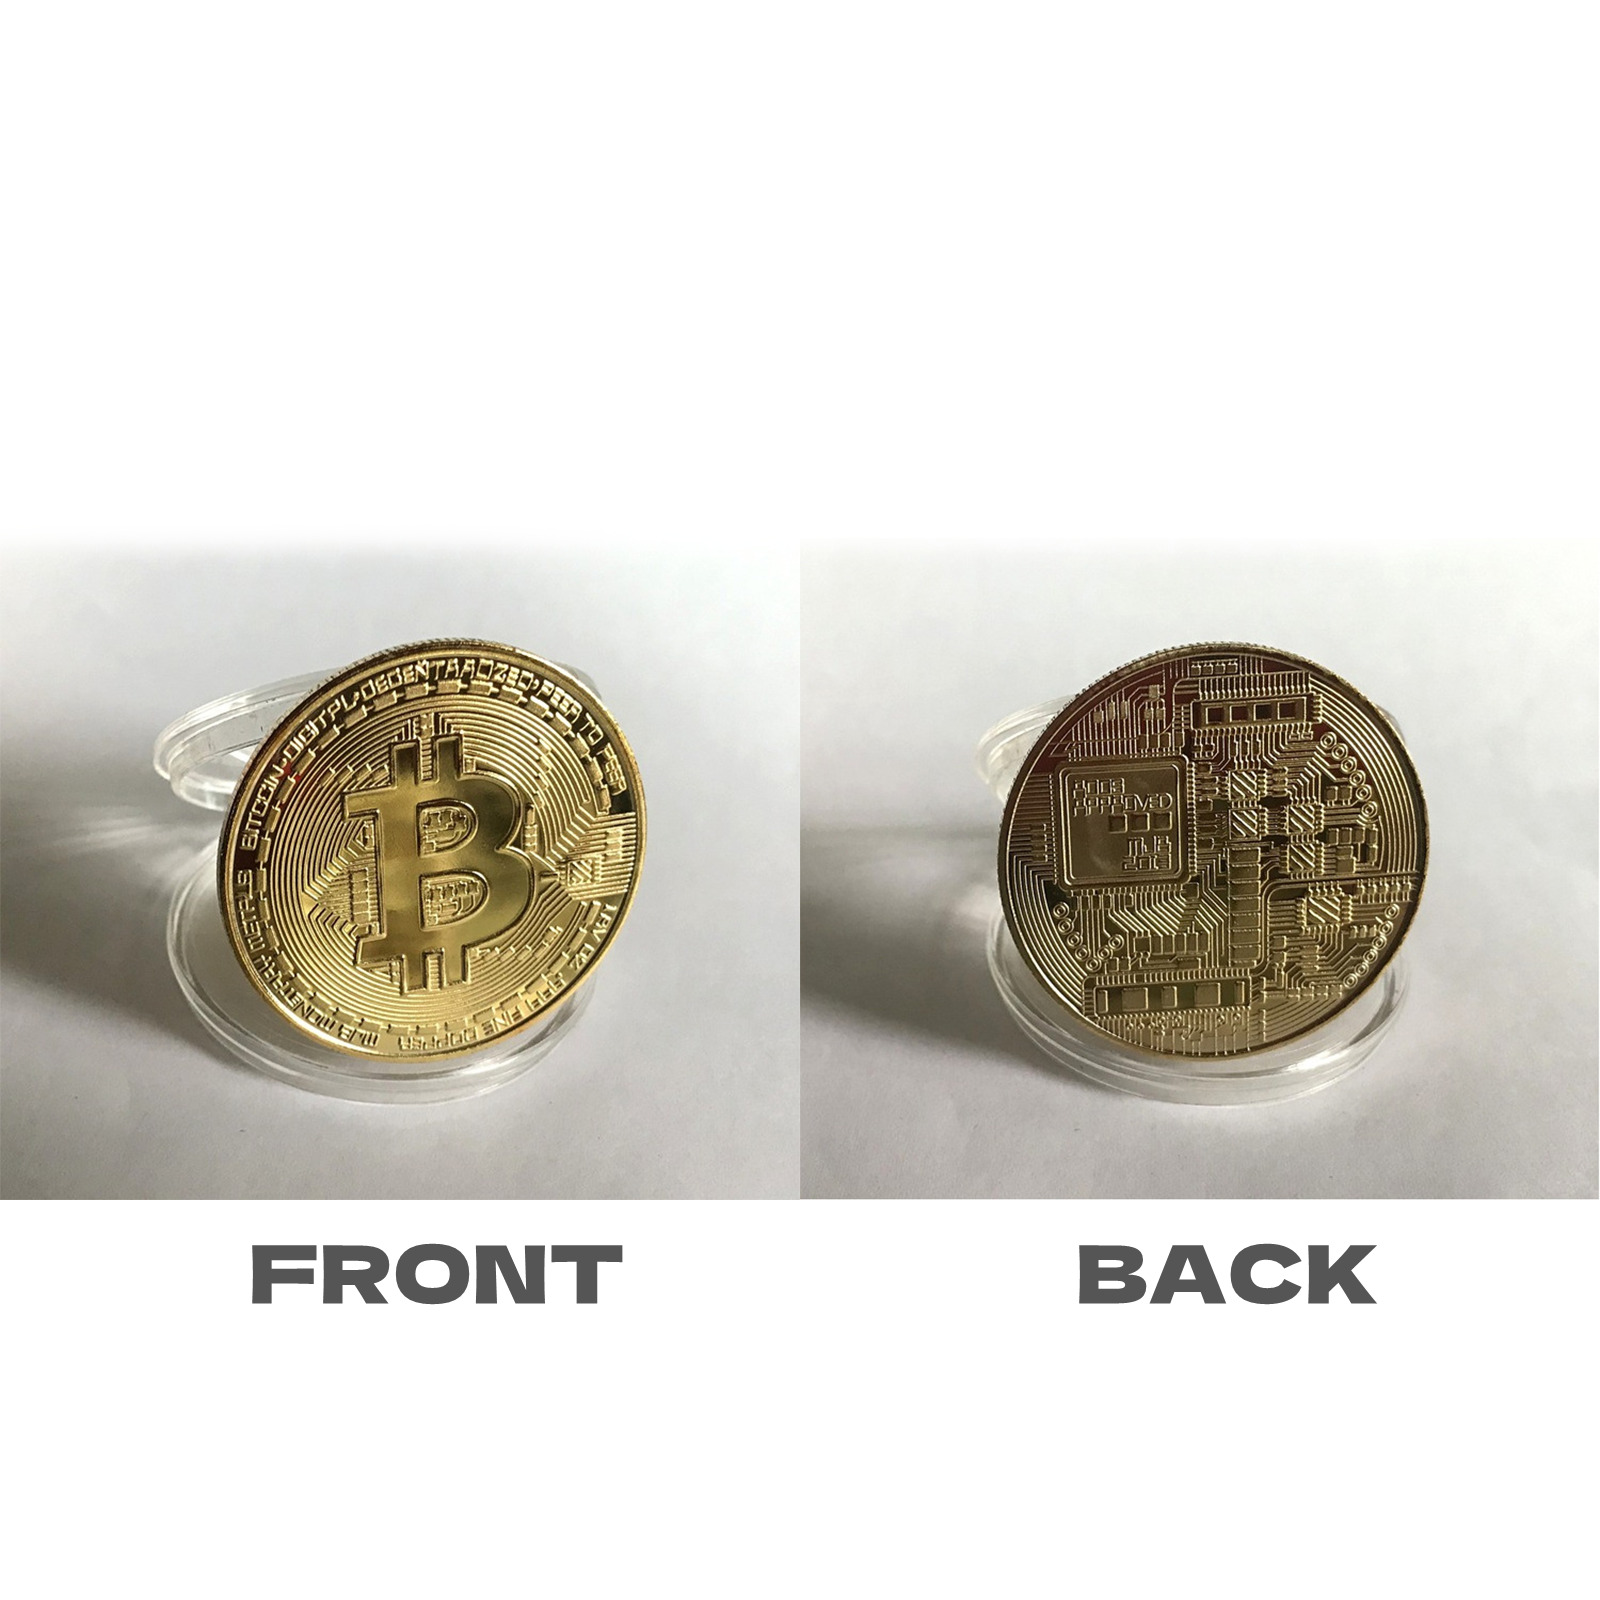 Bitcoin Physical Crypto Coin Commemorative Cryptocurrency with Protective Case